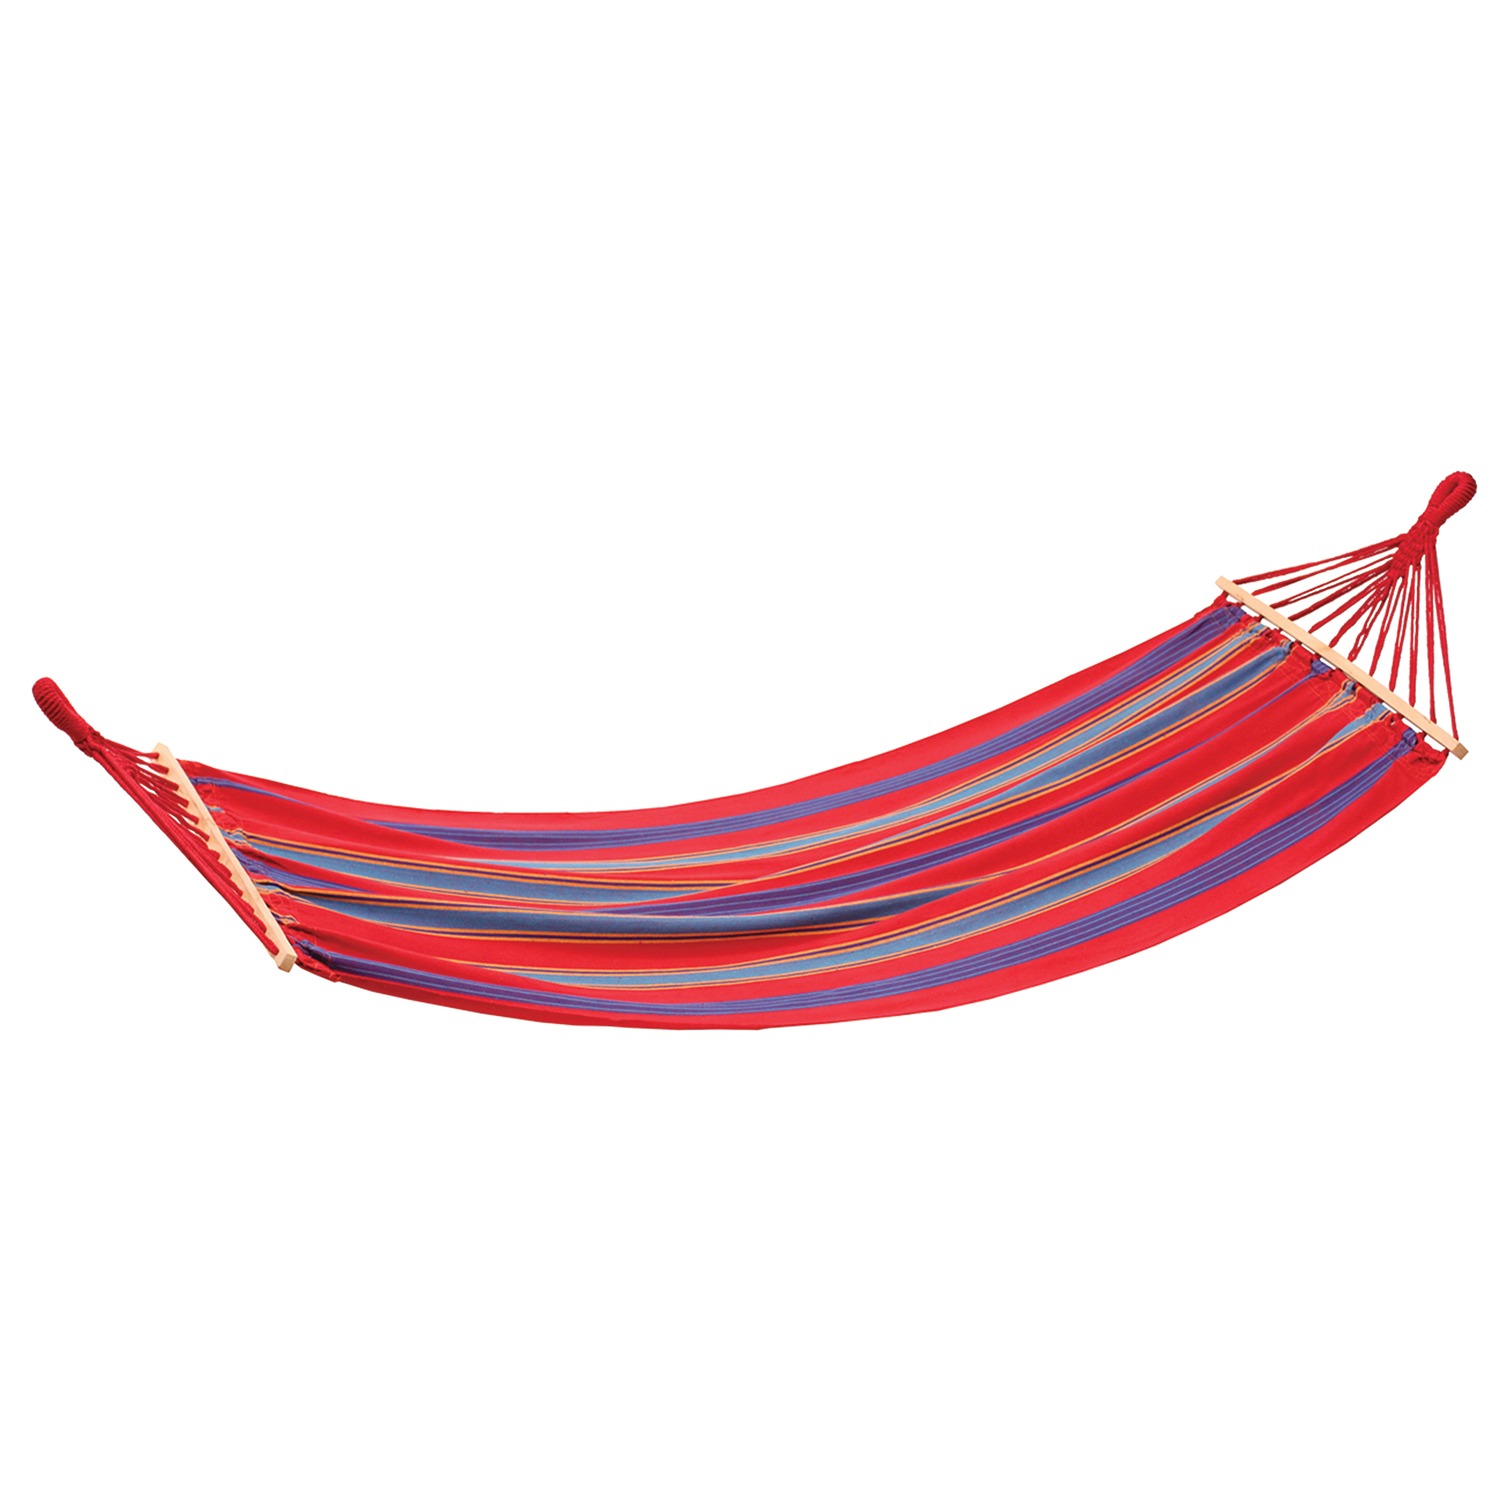 Stansport 30800-60 Cotton-Blend Bahamas Hammock (Red) - image 1 of 3